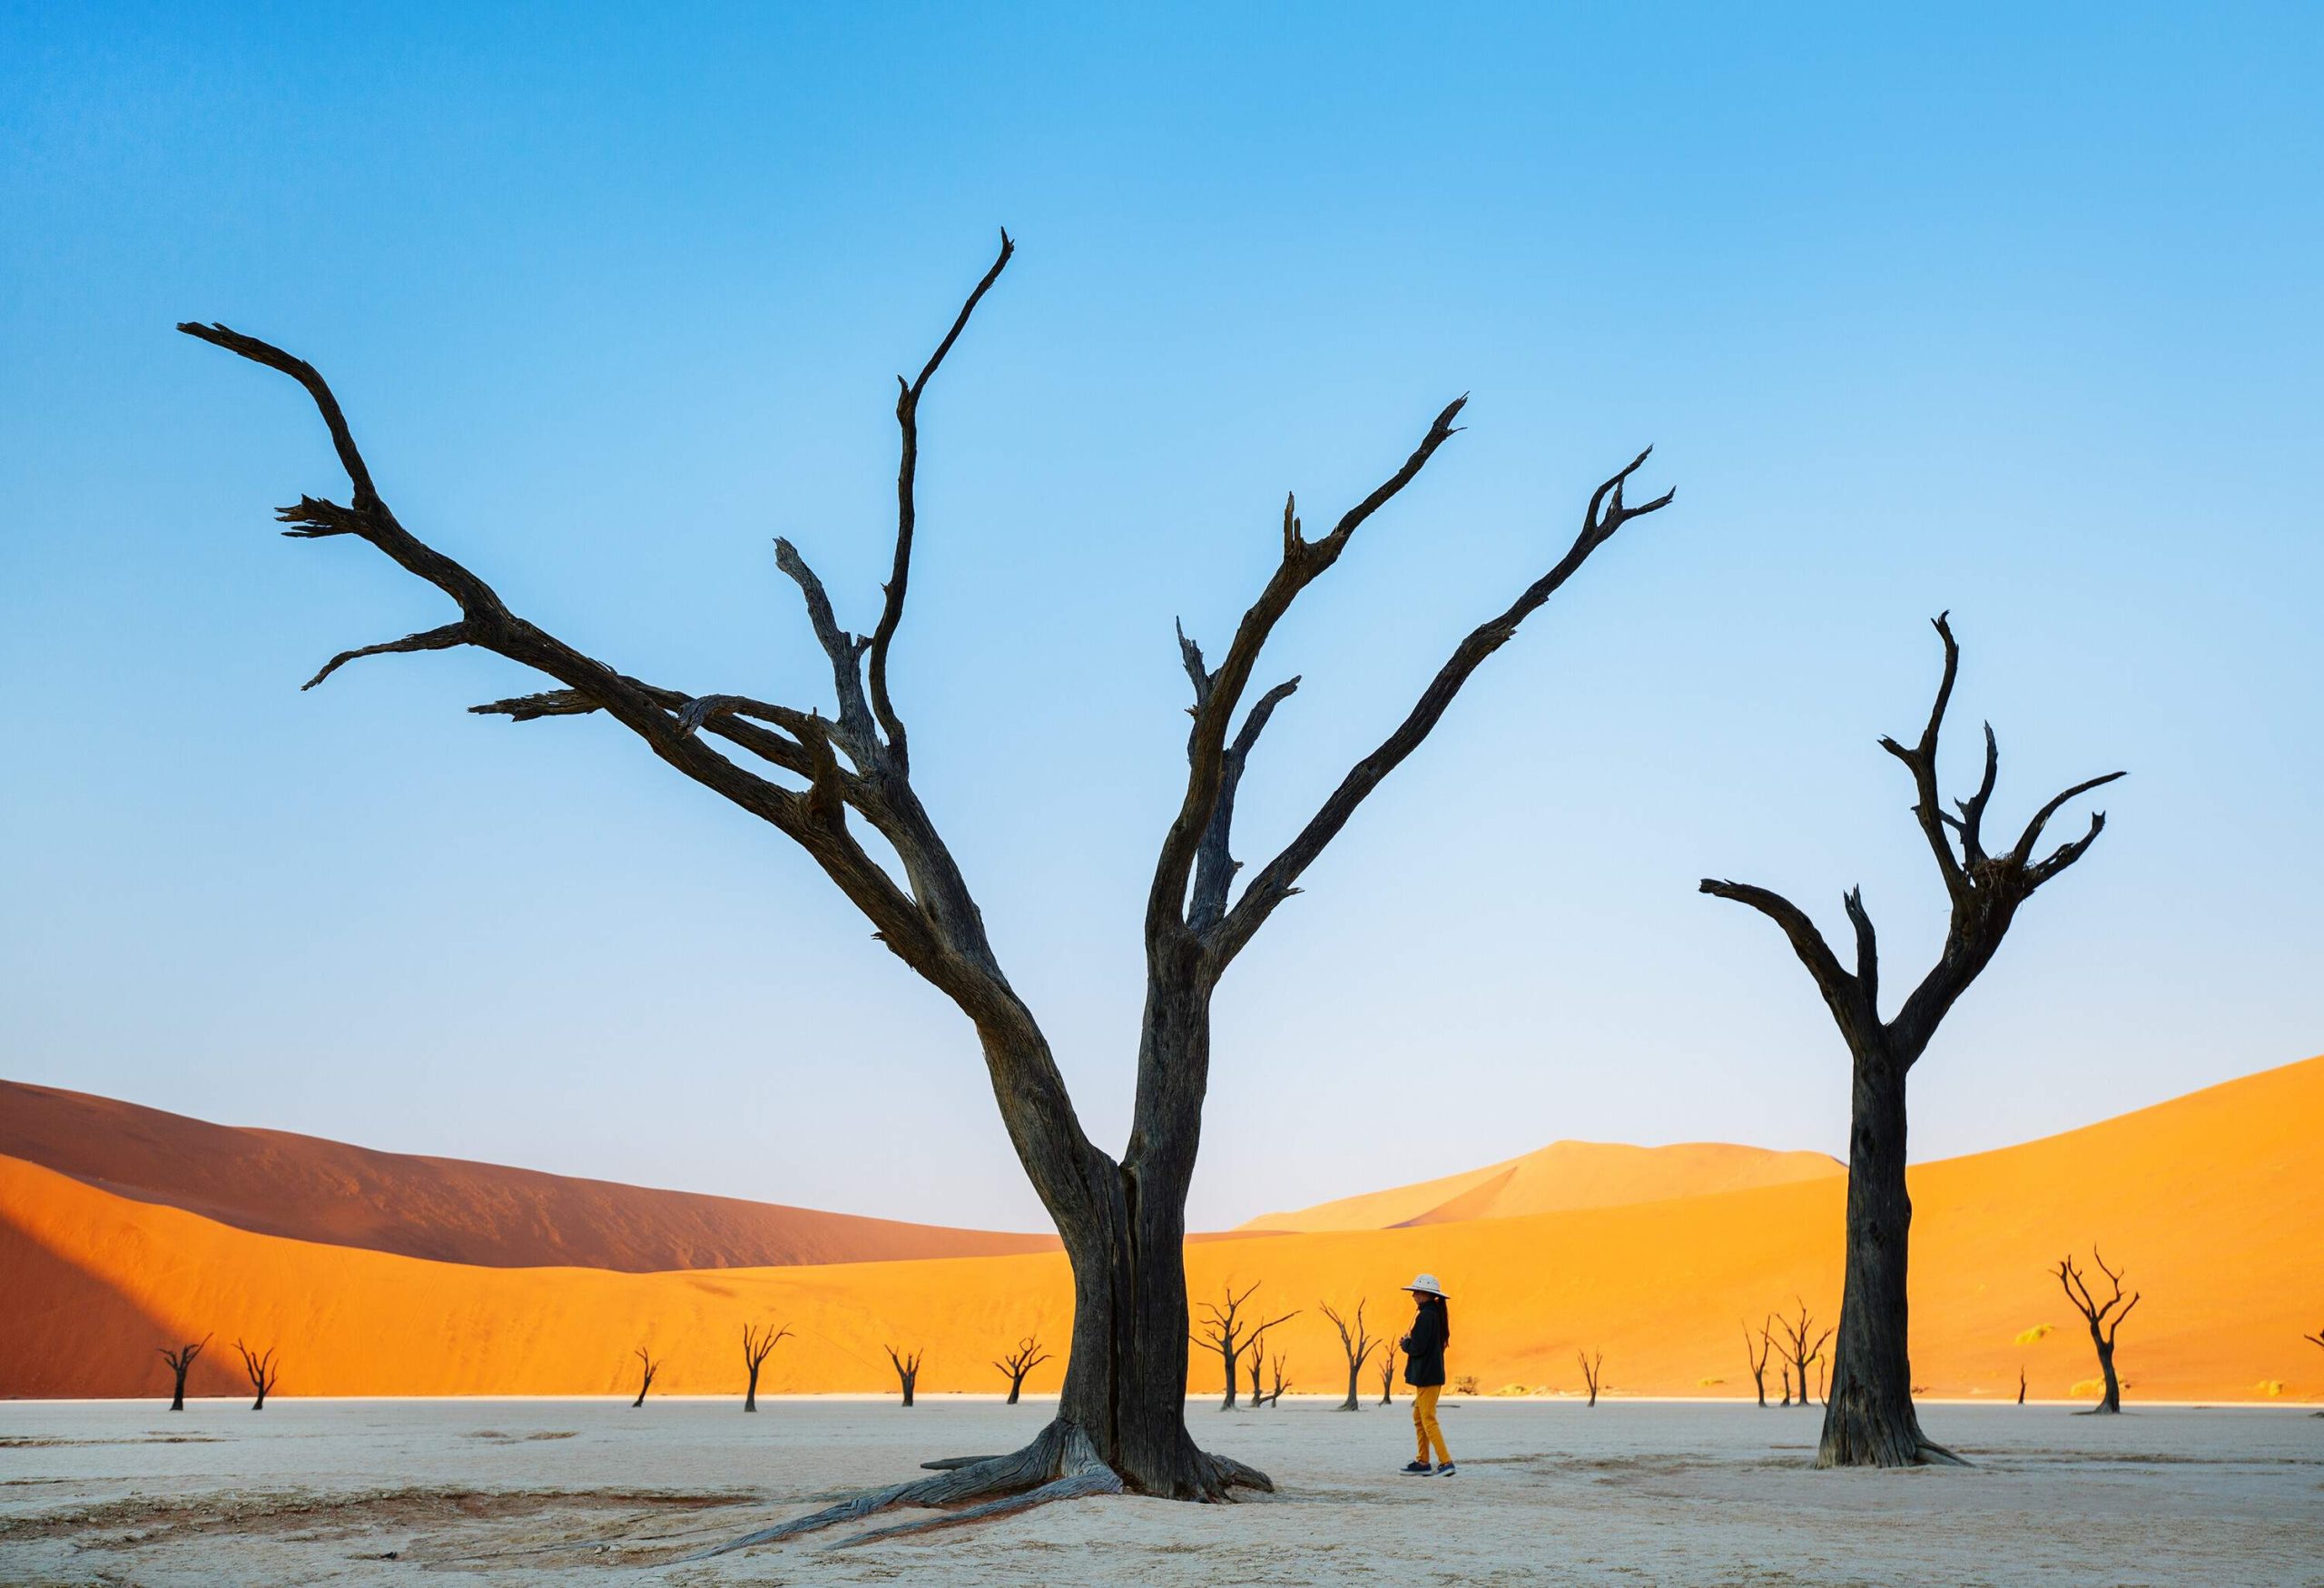 A person stands under a bare tree surrounded by dead trees and red sand dunes.